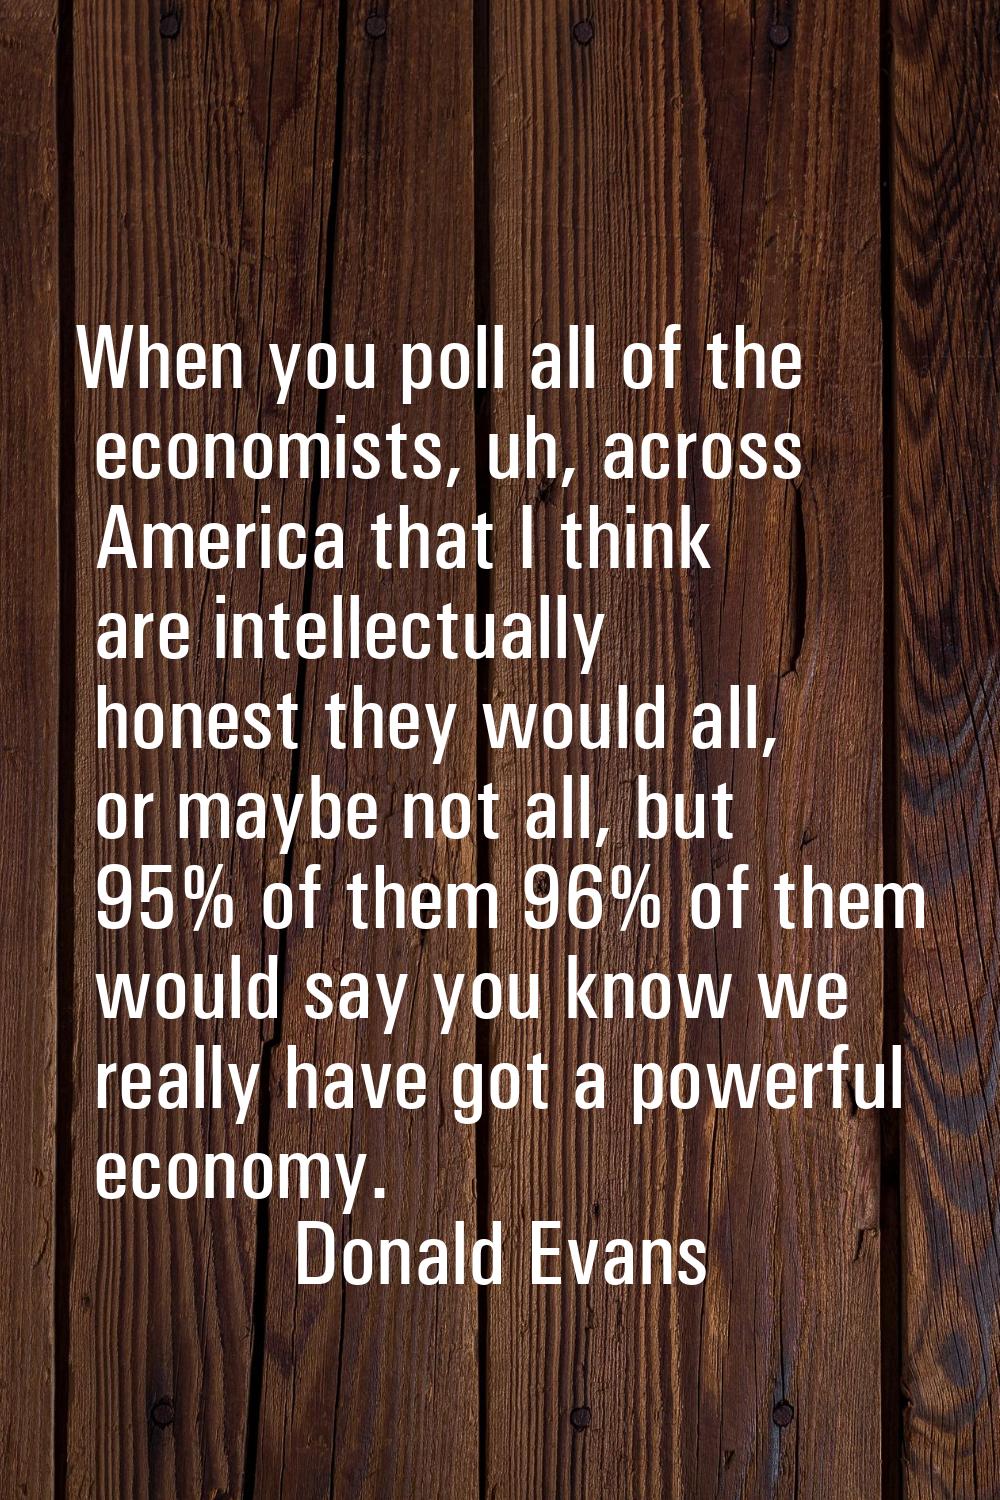 When you poll all of the economists, uh, across America that I think are intellectually honest they